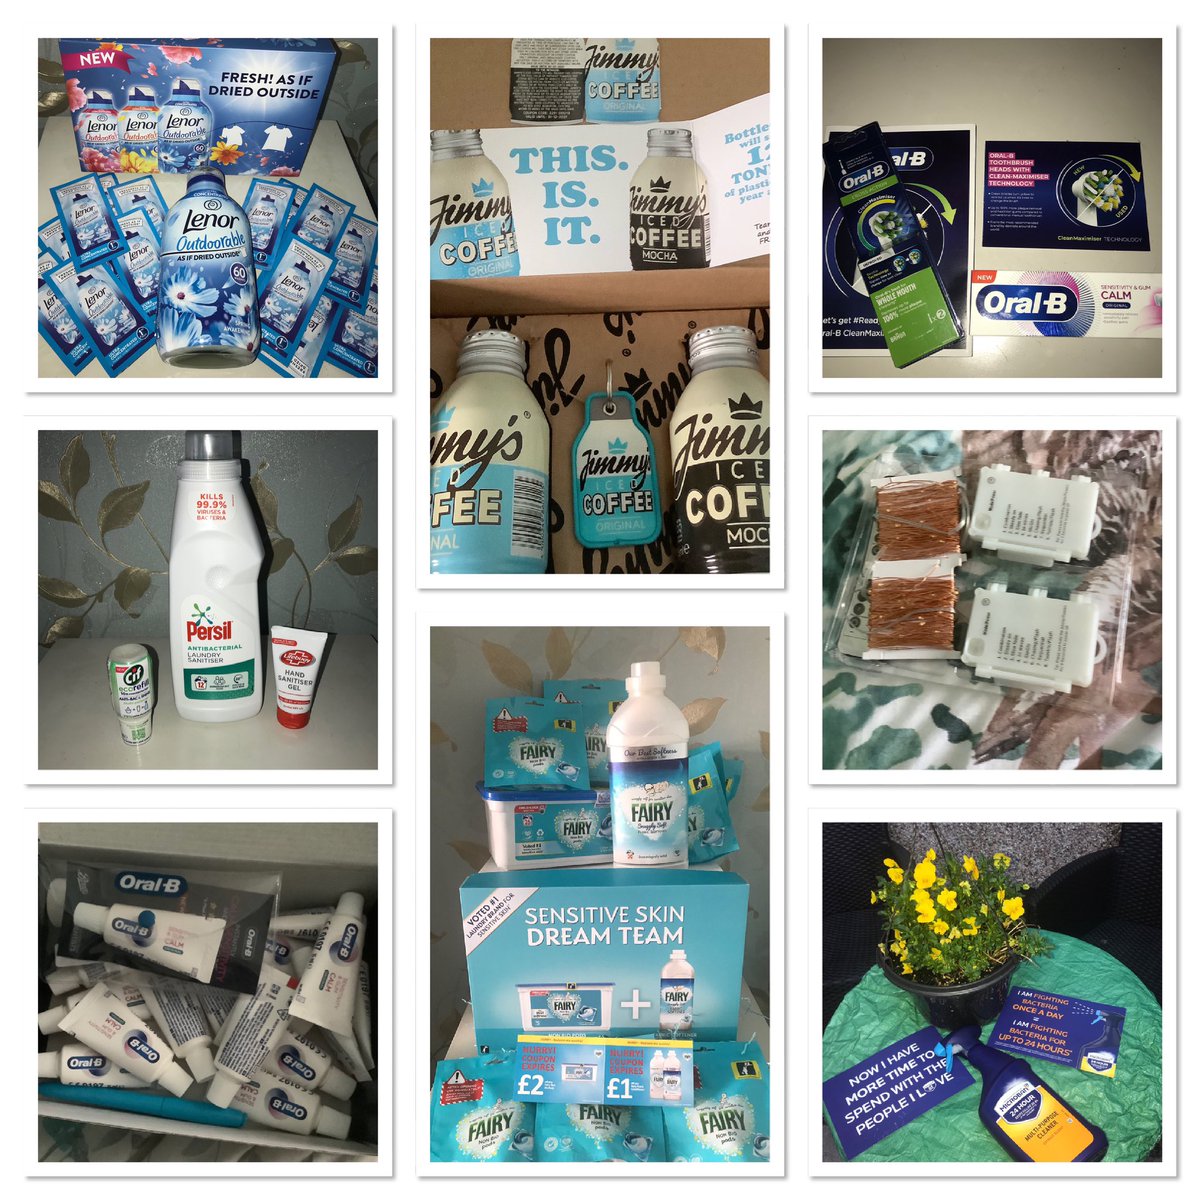 I have been lucky to have been chosen for a few product tests and received samples by post and in the Mail too and from pop ups on Instagram and Facebook too. Also find daily links to freebies @freesamplescouk . #supersavvymeofficial #sopost #unliver #freebies  #freebiesbymail